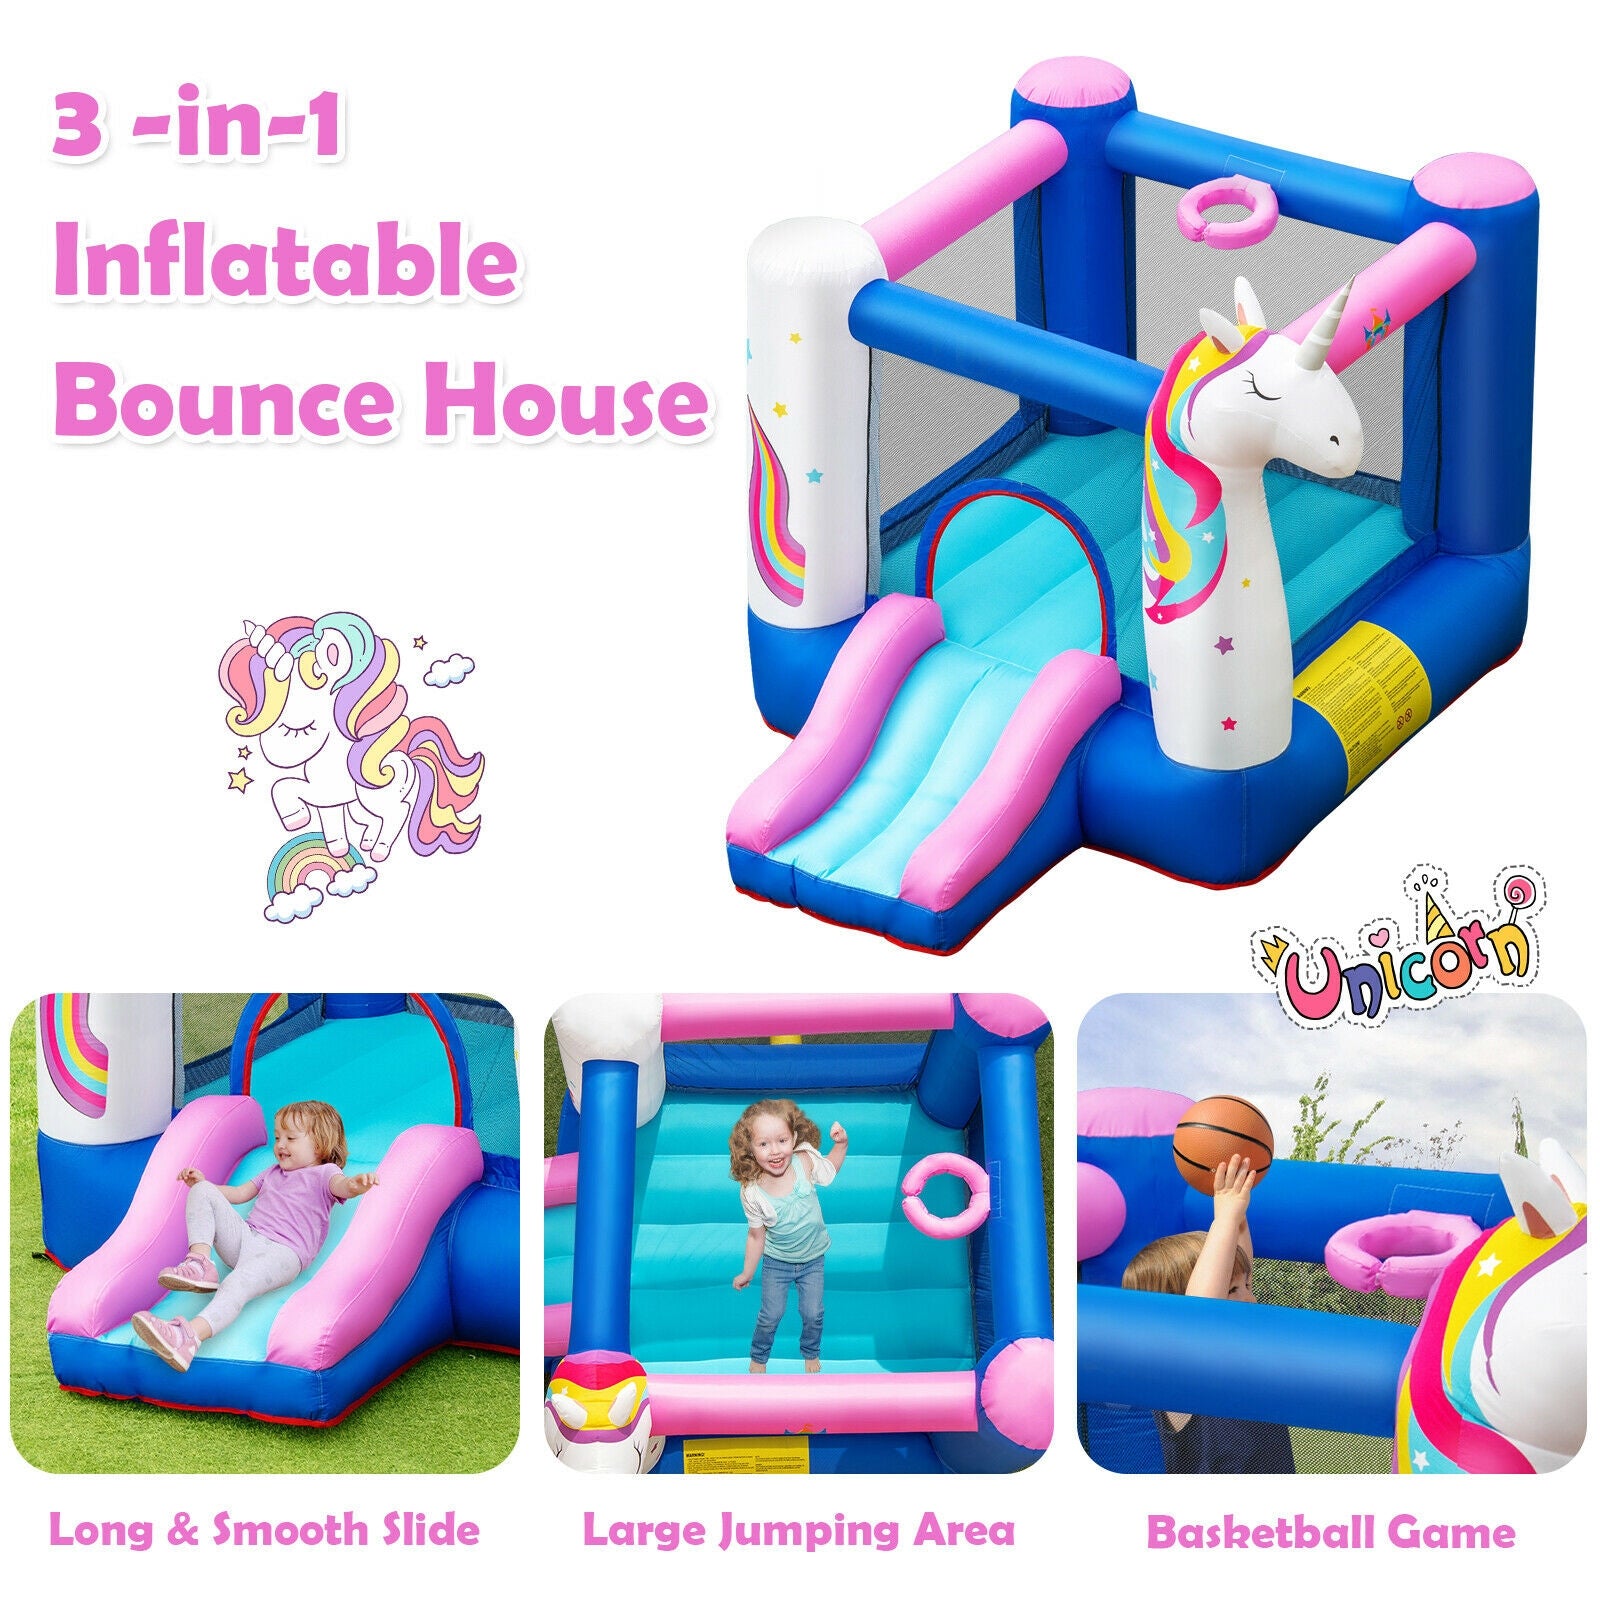 Hikidspace Kids Unicorn Inflatable Bounce House with 480W Blower